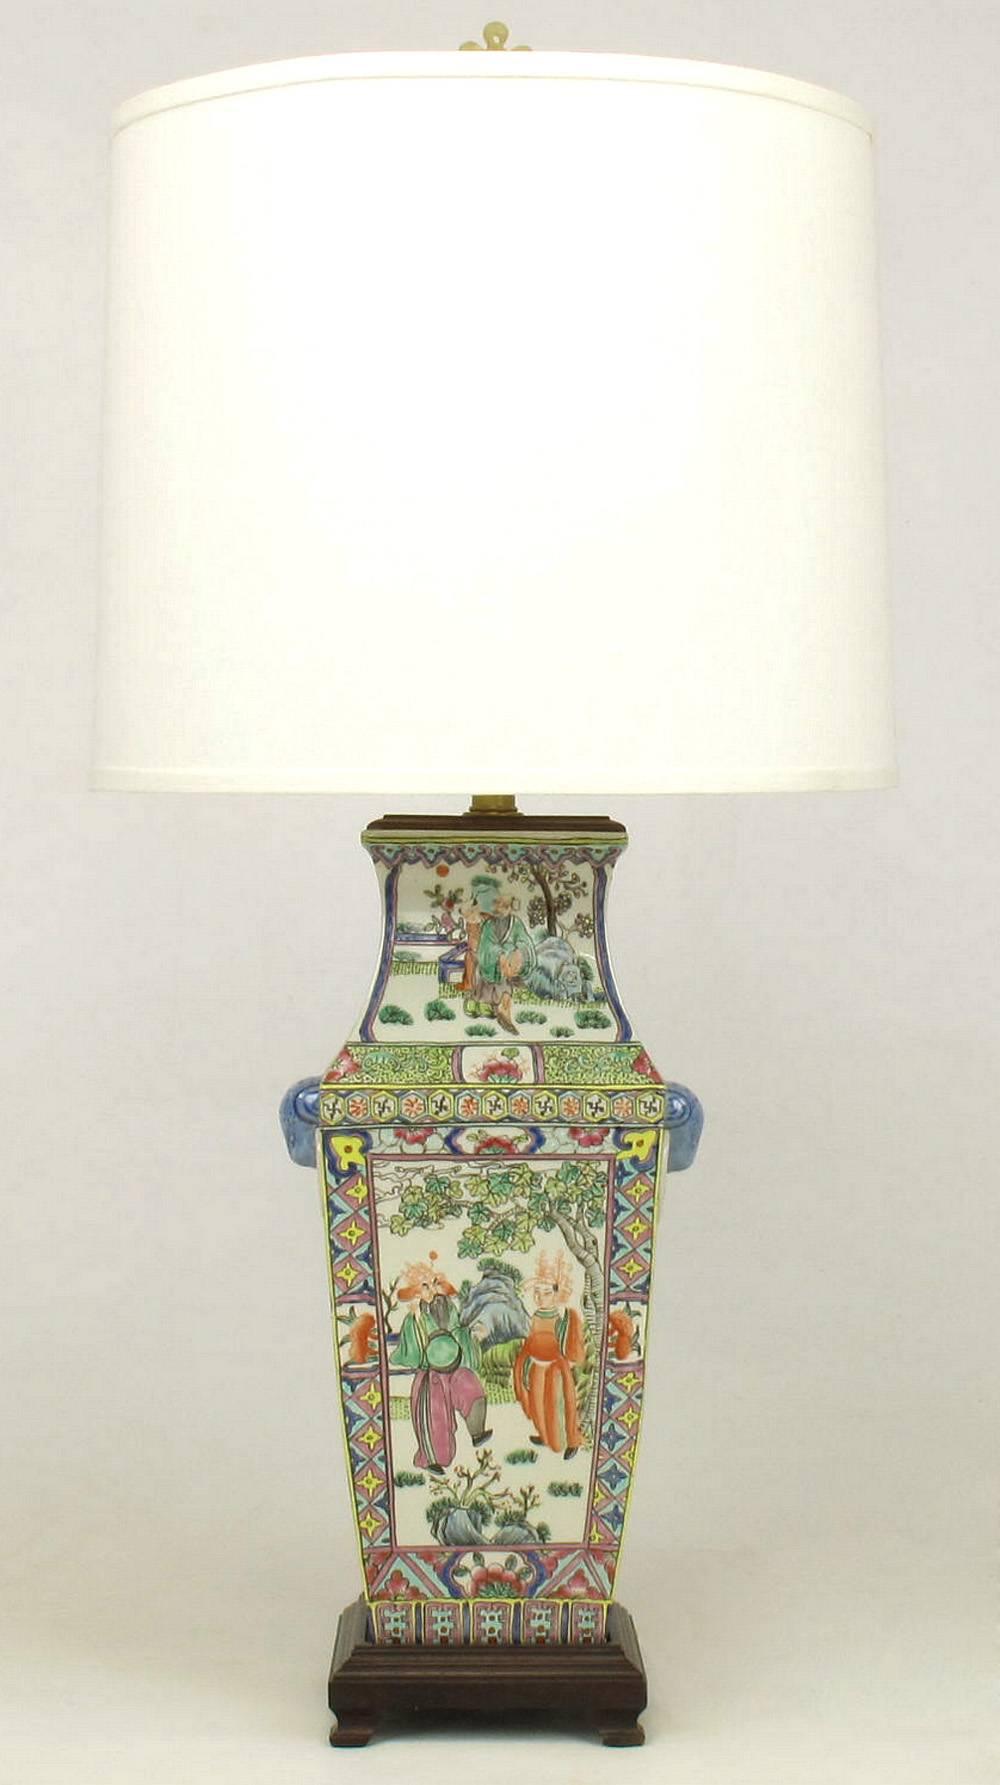 Pair of Chinese vases turned into unique table lamps from Windemere Lamps for Lotus Arts. Hand-painted porcelain vases with stylized ram head side handles. Mahogany cap and footed base. 

Lotus Arts was founded in 1980 as a source for the rare and